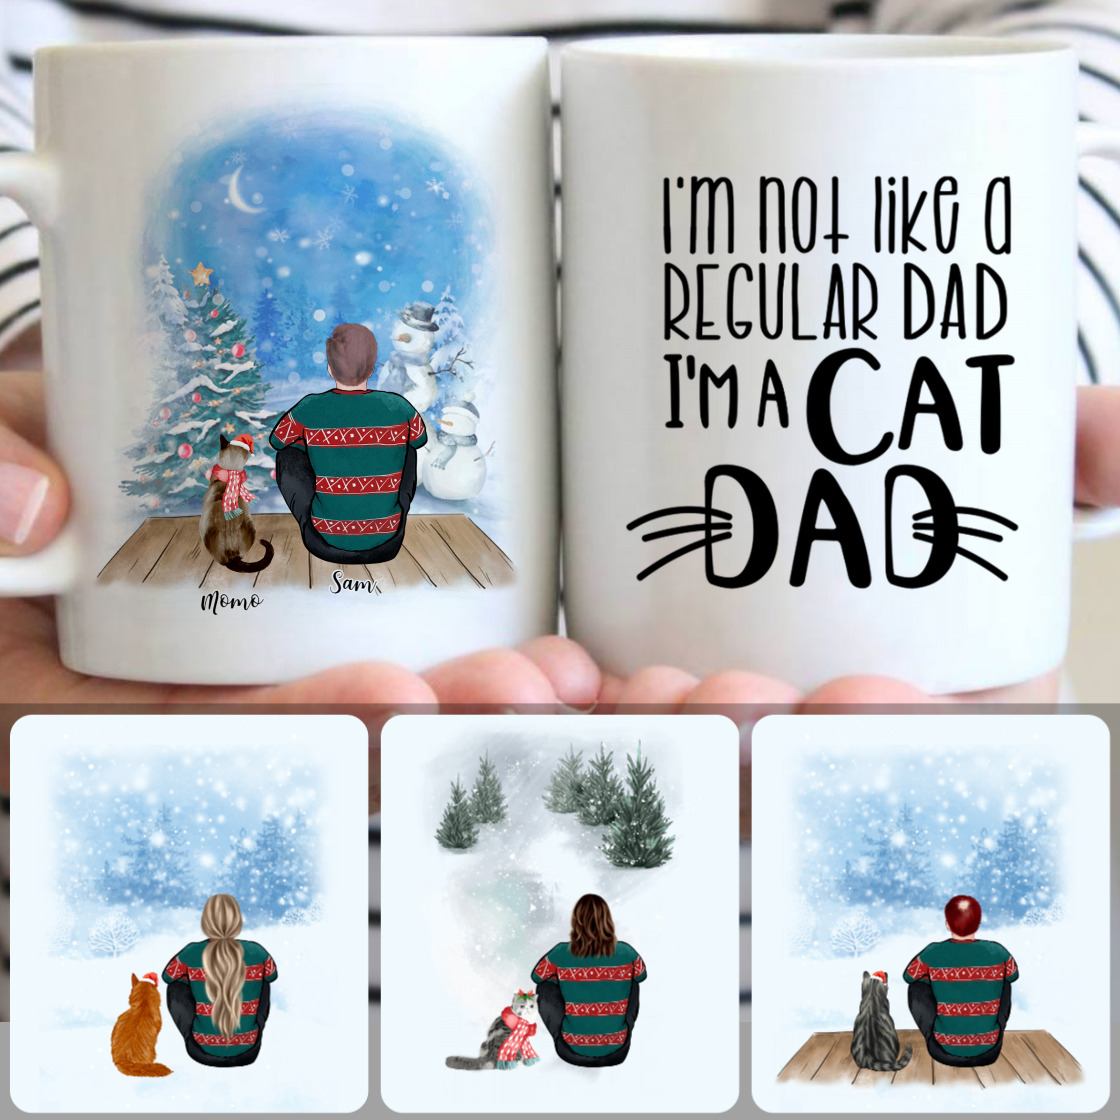 Personalized Mug, Special Christmas Gifts For Cat Lovers, Dad & Cat Customized Coffee Mug With Names